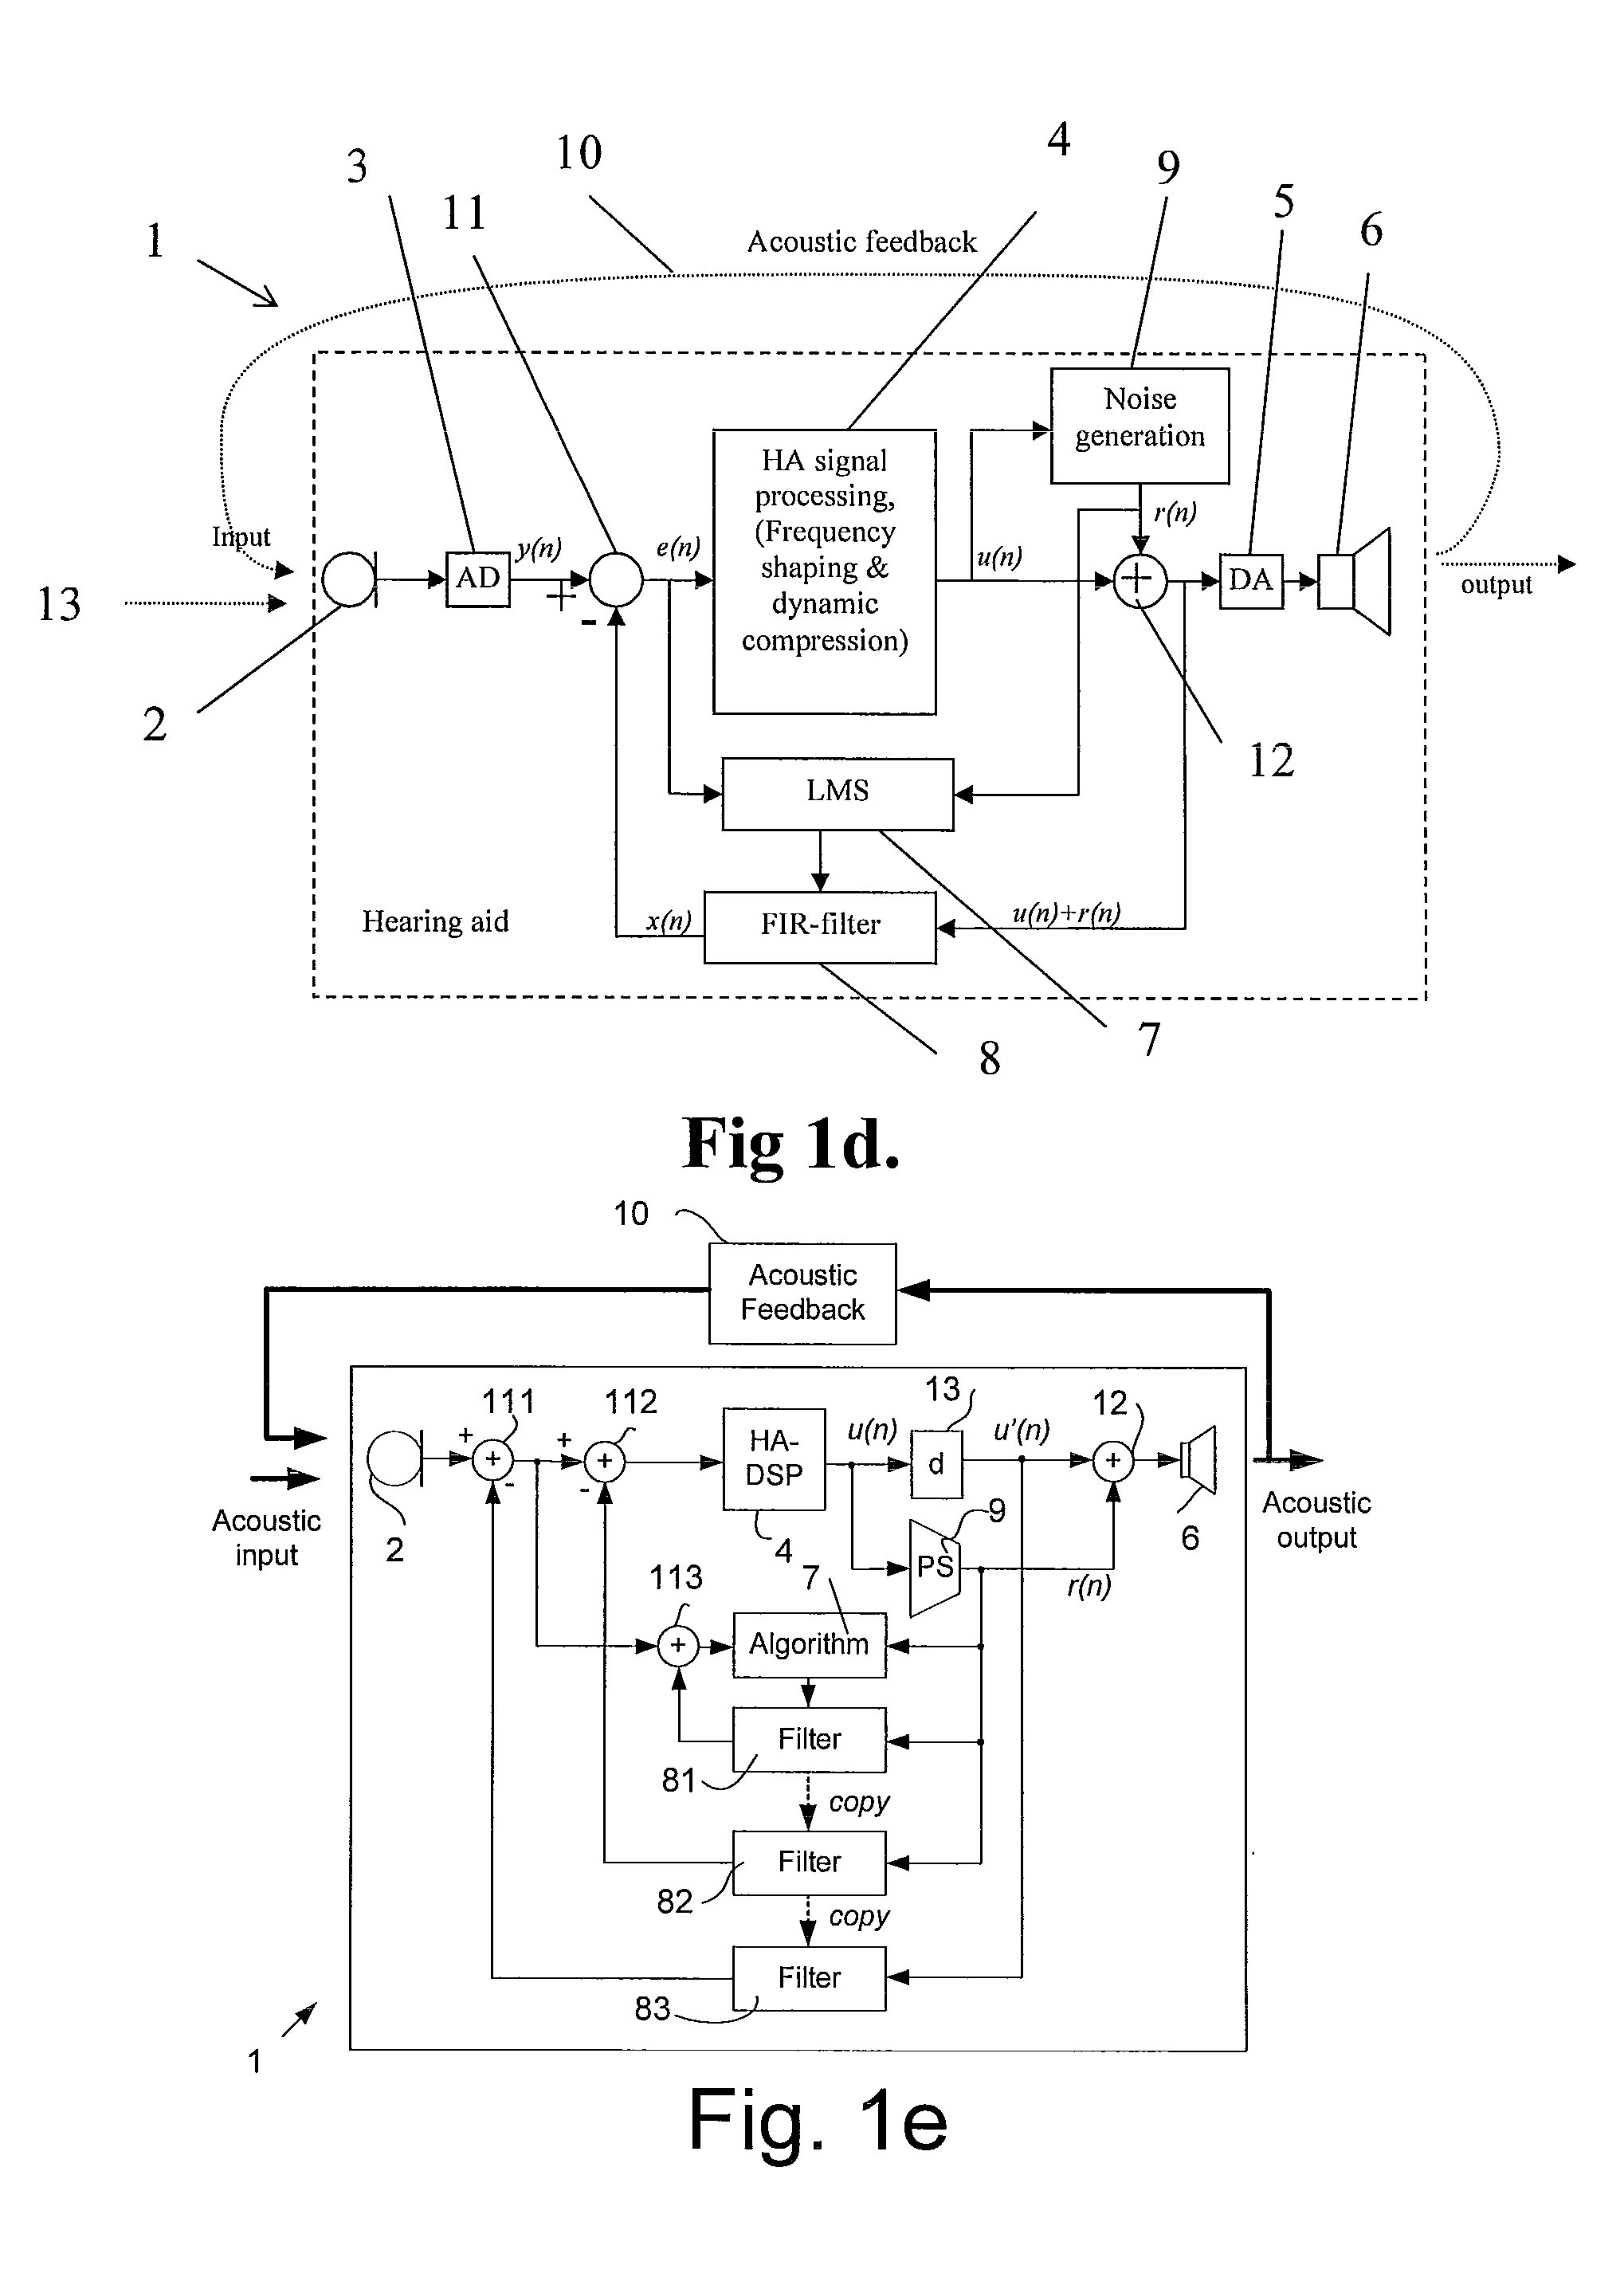 Generation of probe noise in a feedback cancellation system